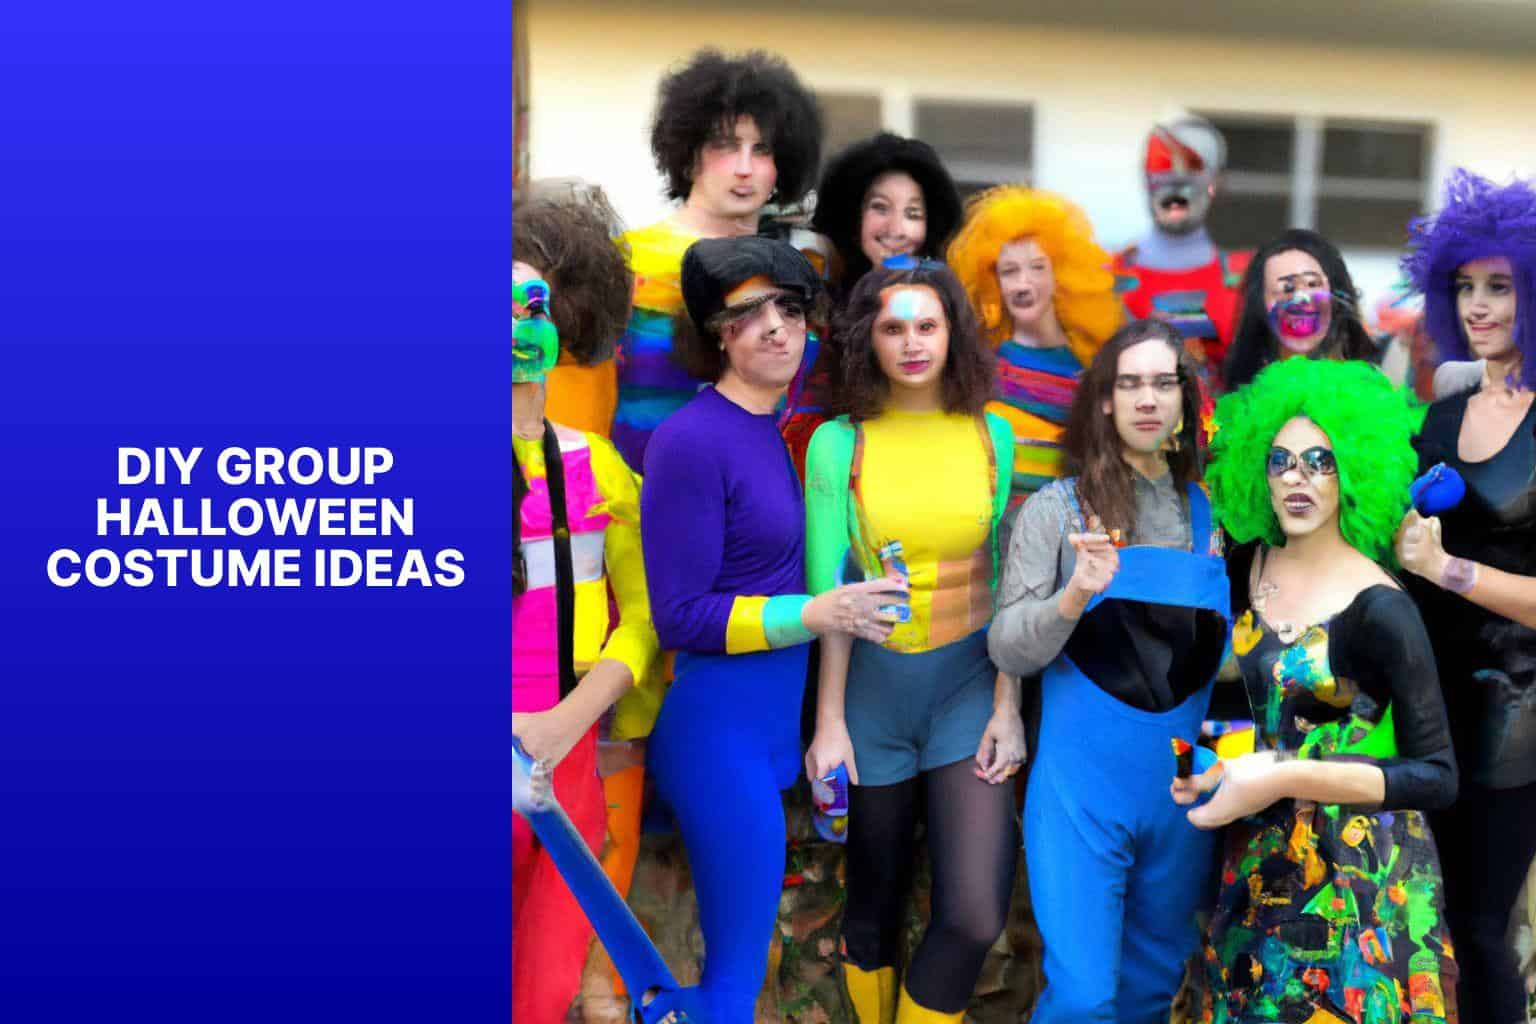 DIY Group Halloween Costume Ideas - group halloween costumes for 6 